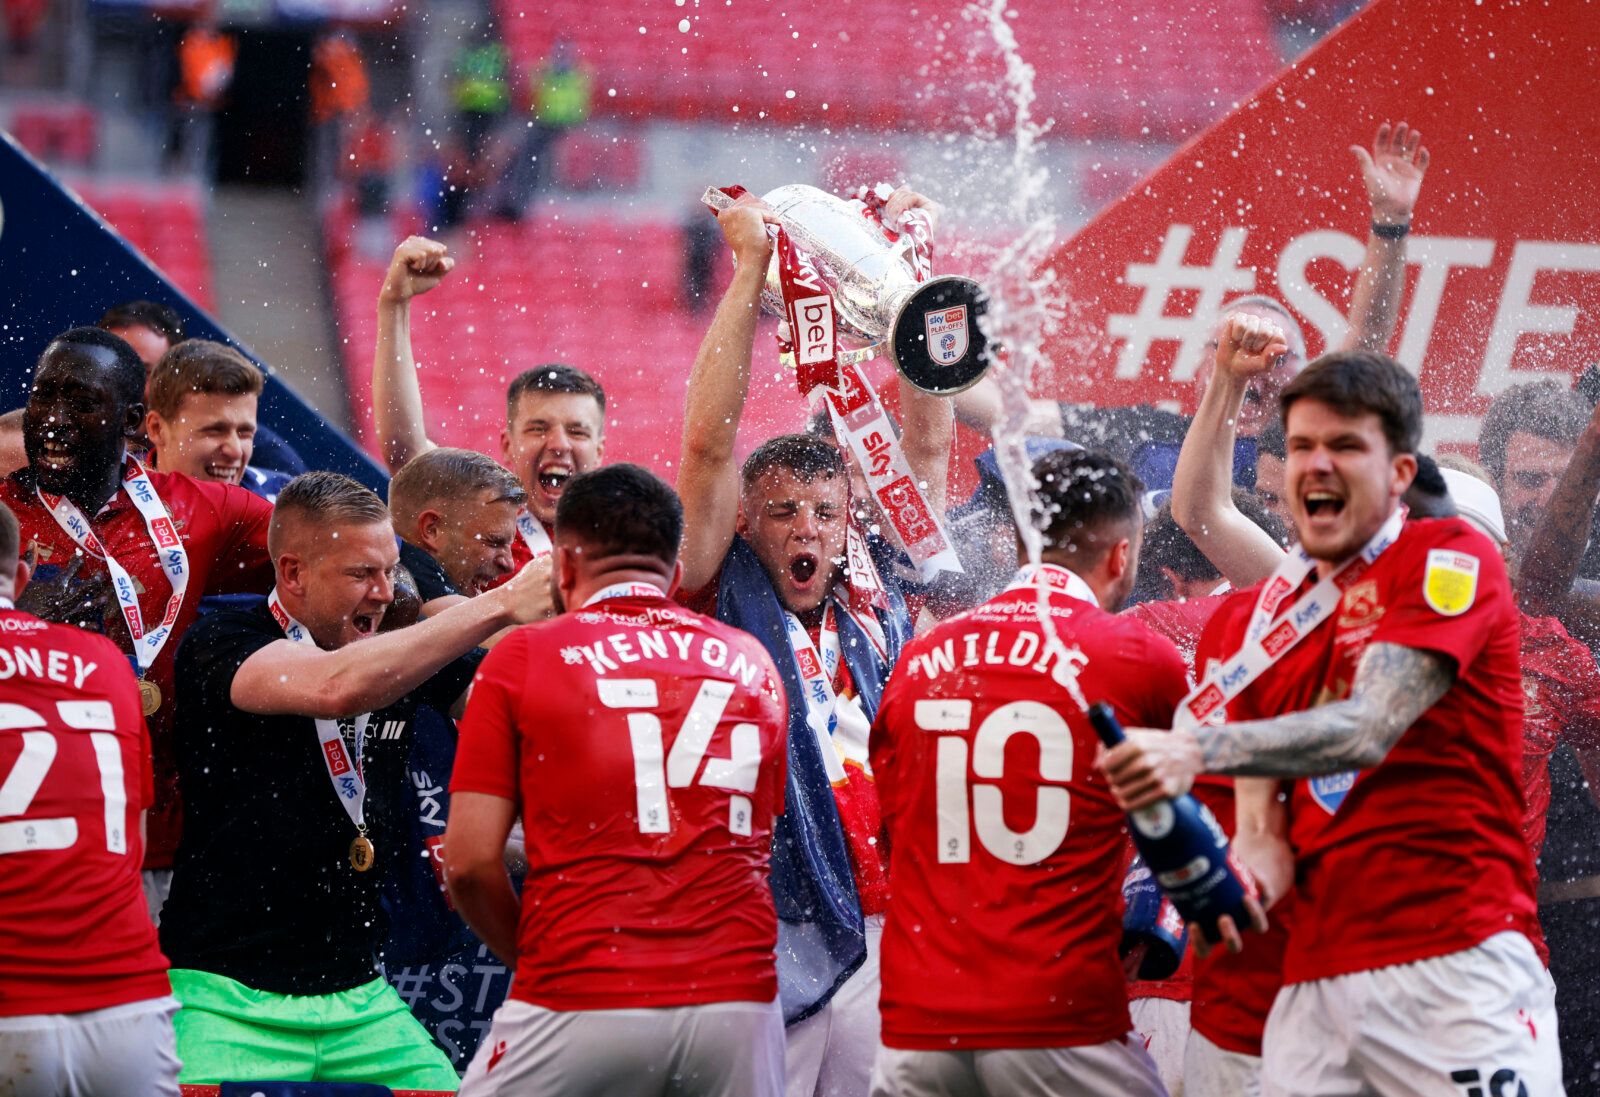 Soccer Football - League Two Play-Off Final - Morecambe v Newport County - Wembley Stadium, London, Britain - May 31, 2021 Morecambe celebrates with the trophy after winning the League Two Play-Off Final Action Images/John Sibley EDITORIAL USE ONLY. No use with unauthorized audio, video, data, fixture lists, club/league logos or 'live' services. Online in-match use limited to 75 images, no video emulation. No use in betting, games or single club /league/player publications.  Please contact your 